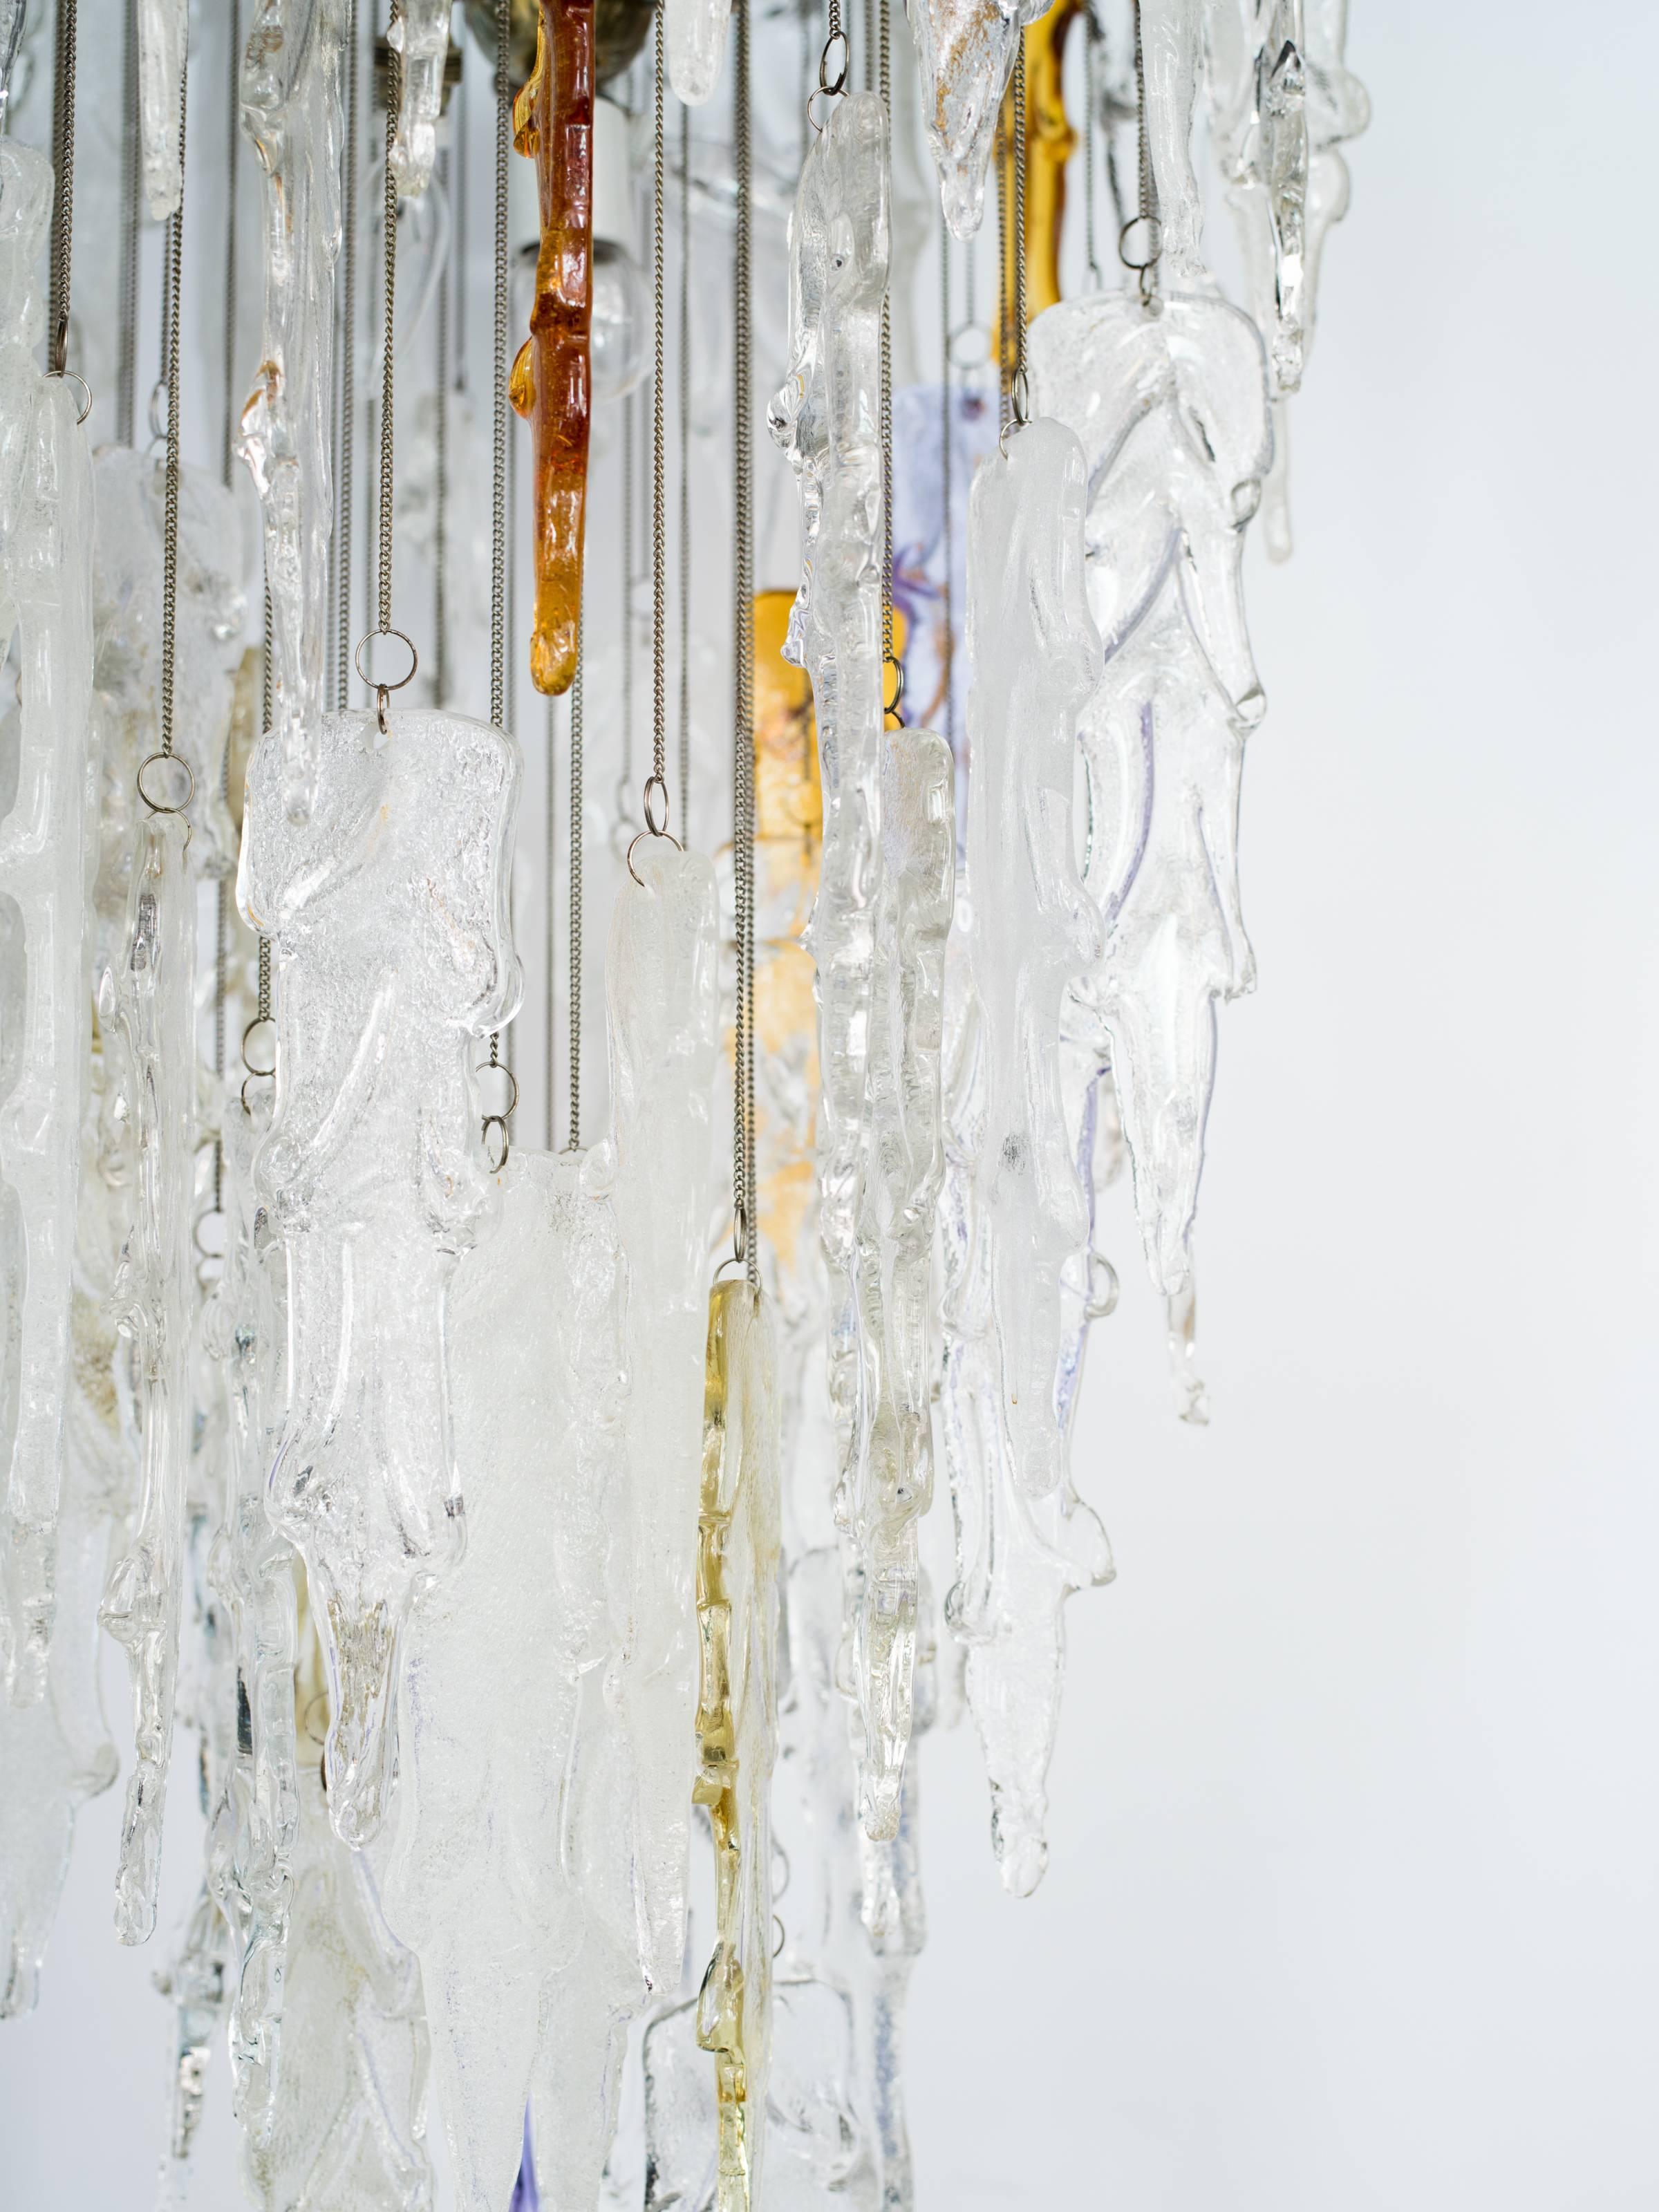 Magnificent and rare chandelier comprised of handblown Murano glass pendants with organic icicle formations. Pendants hang at varying heights from individual chain fittings, creating a multiple tier design. Chandelier features amorphous clear and